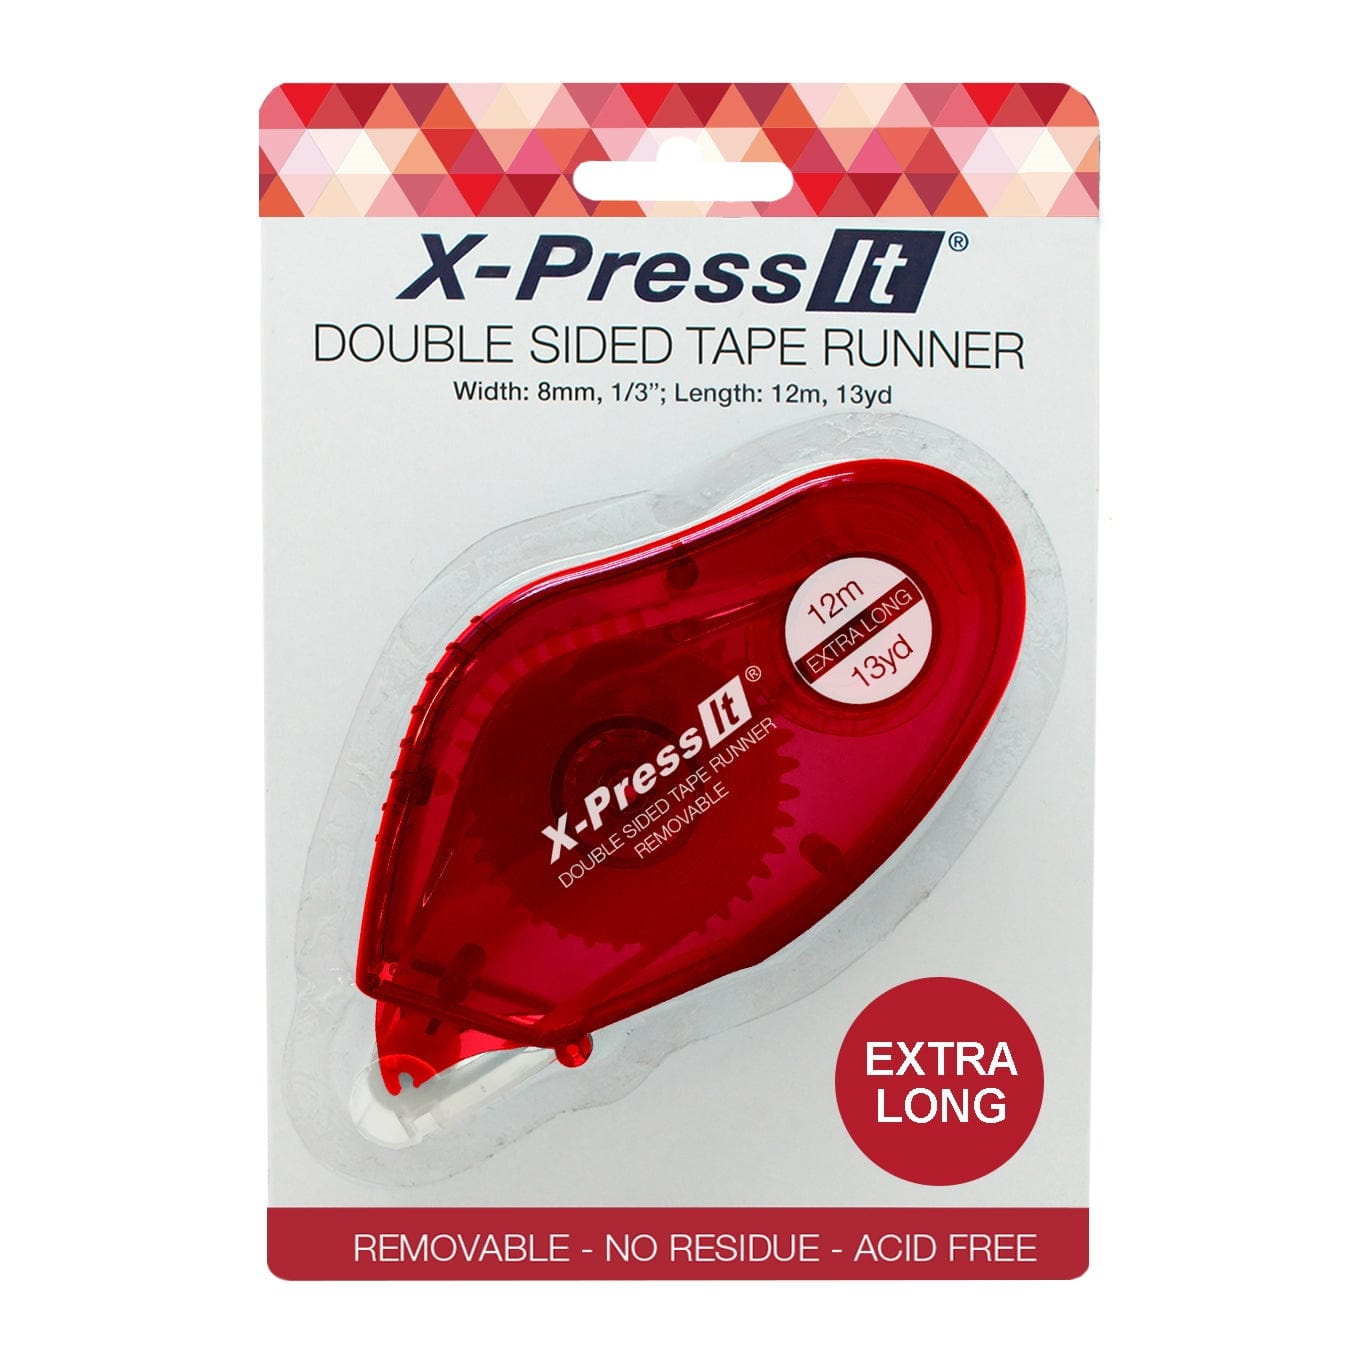 X-Press It Double Sided Tape Runner 8mm x 12m Removable